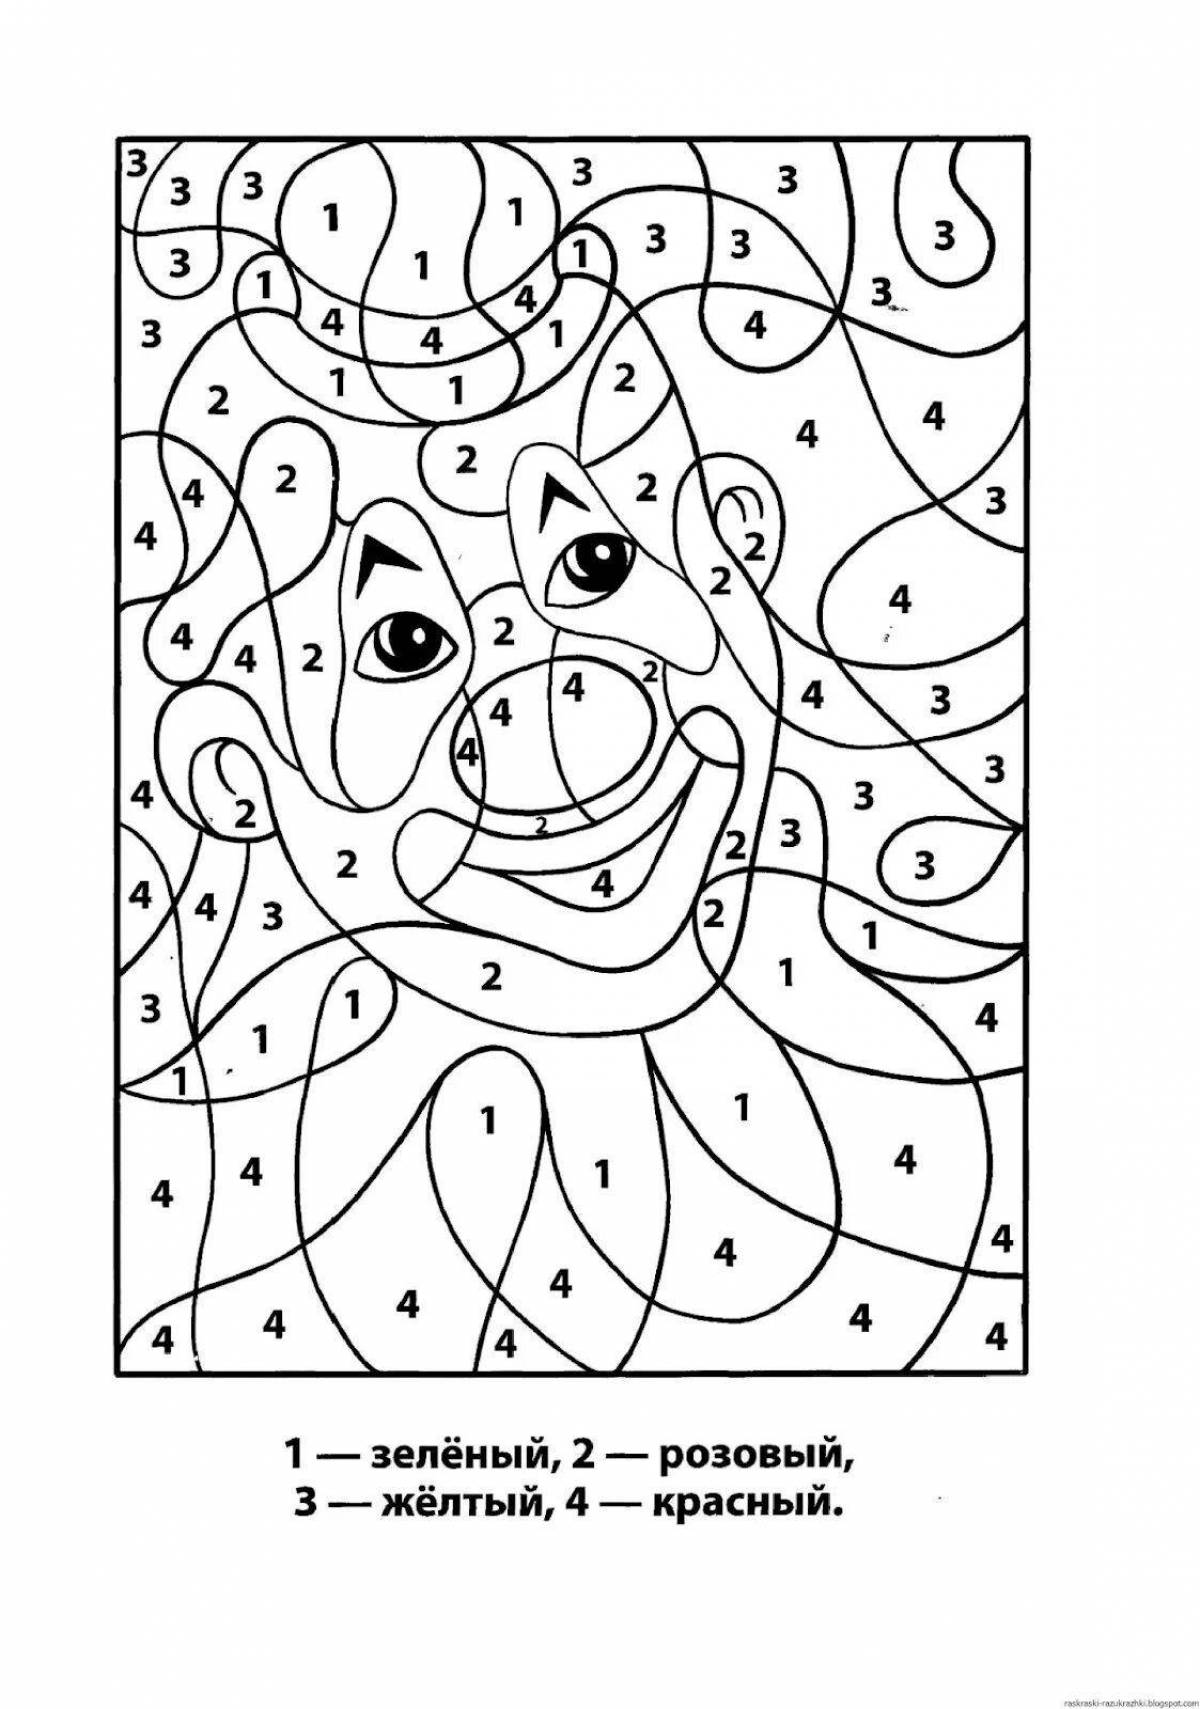 Educational coloring book for children logical for 5 years